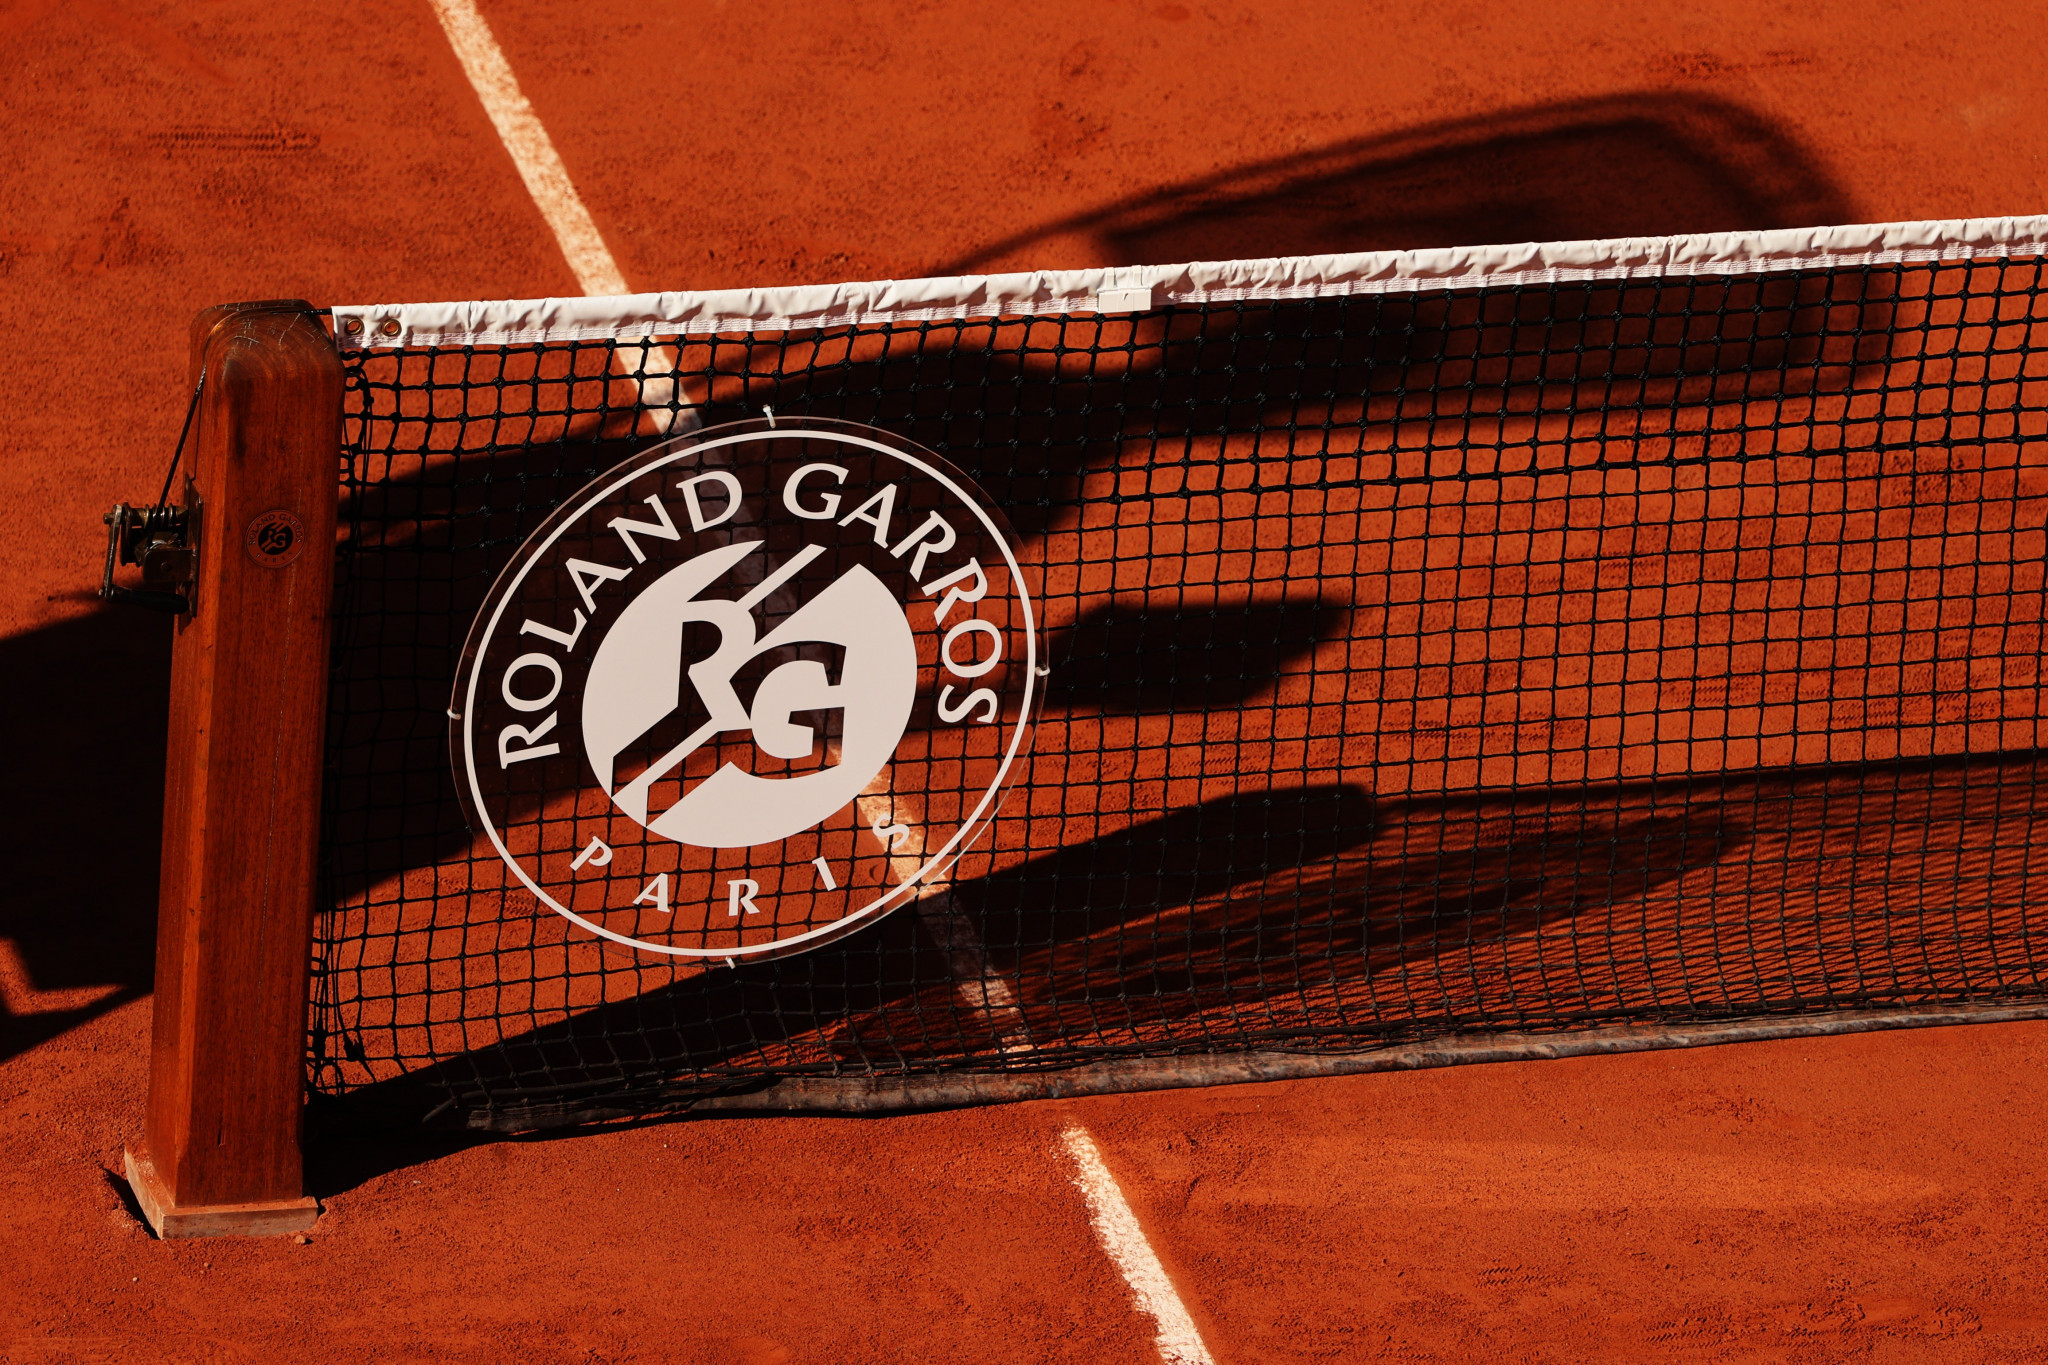 French Open refuses to follow Wimbledon in banning Russian and Belarusian players